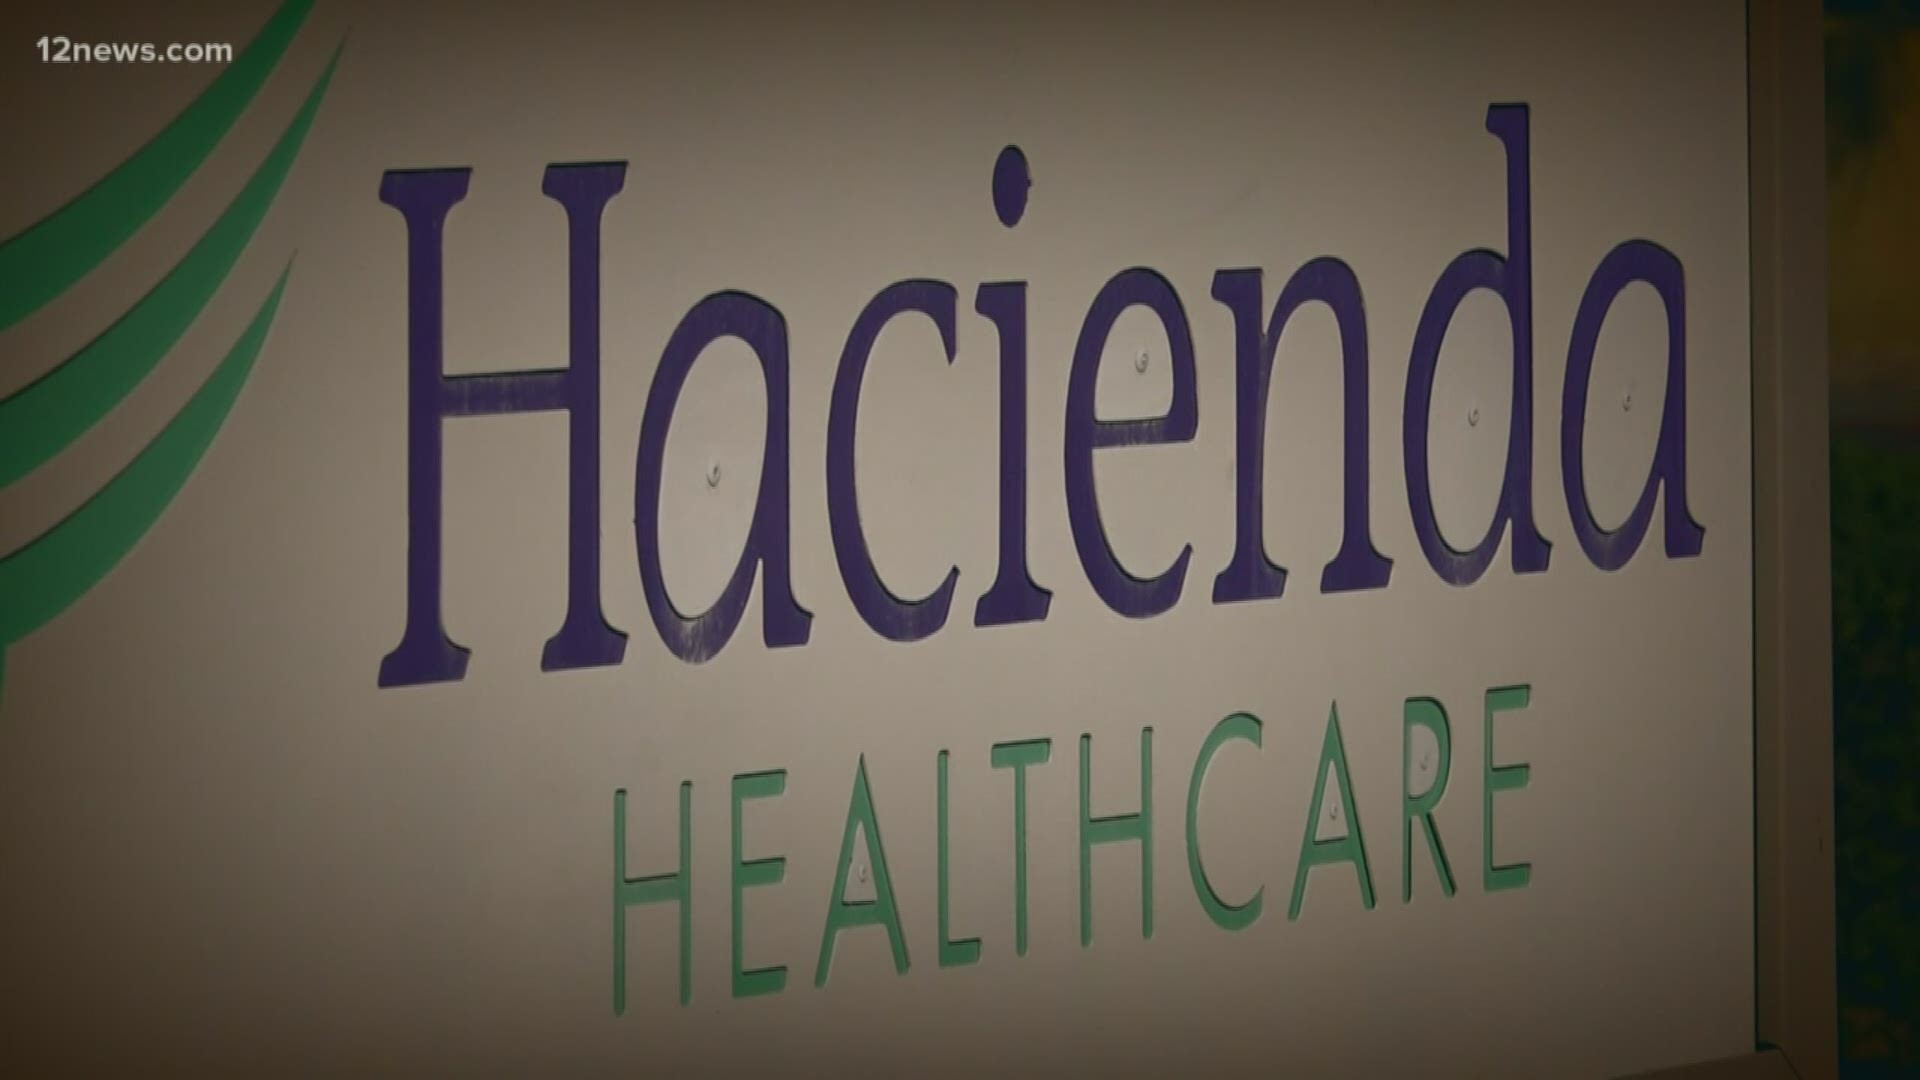 The doctor who treated an incapacitated woman who gave birth at Hacienda Health Care is giving up his medical license. No one knew the woman was raped and pregnant.